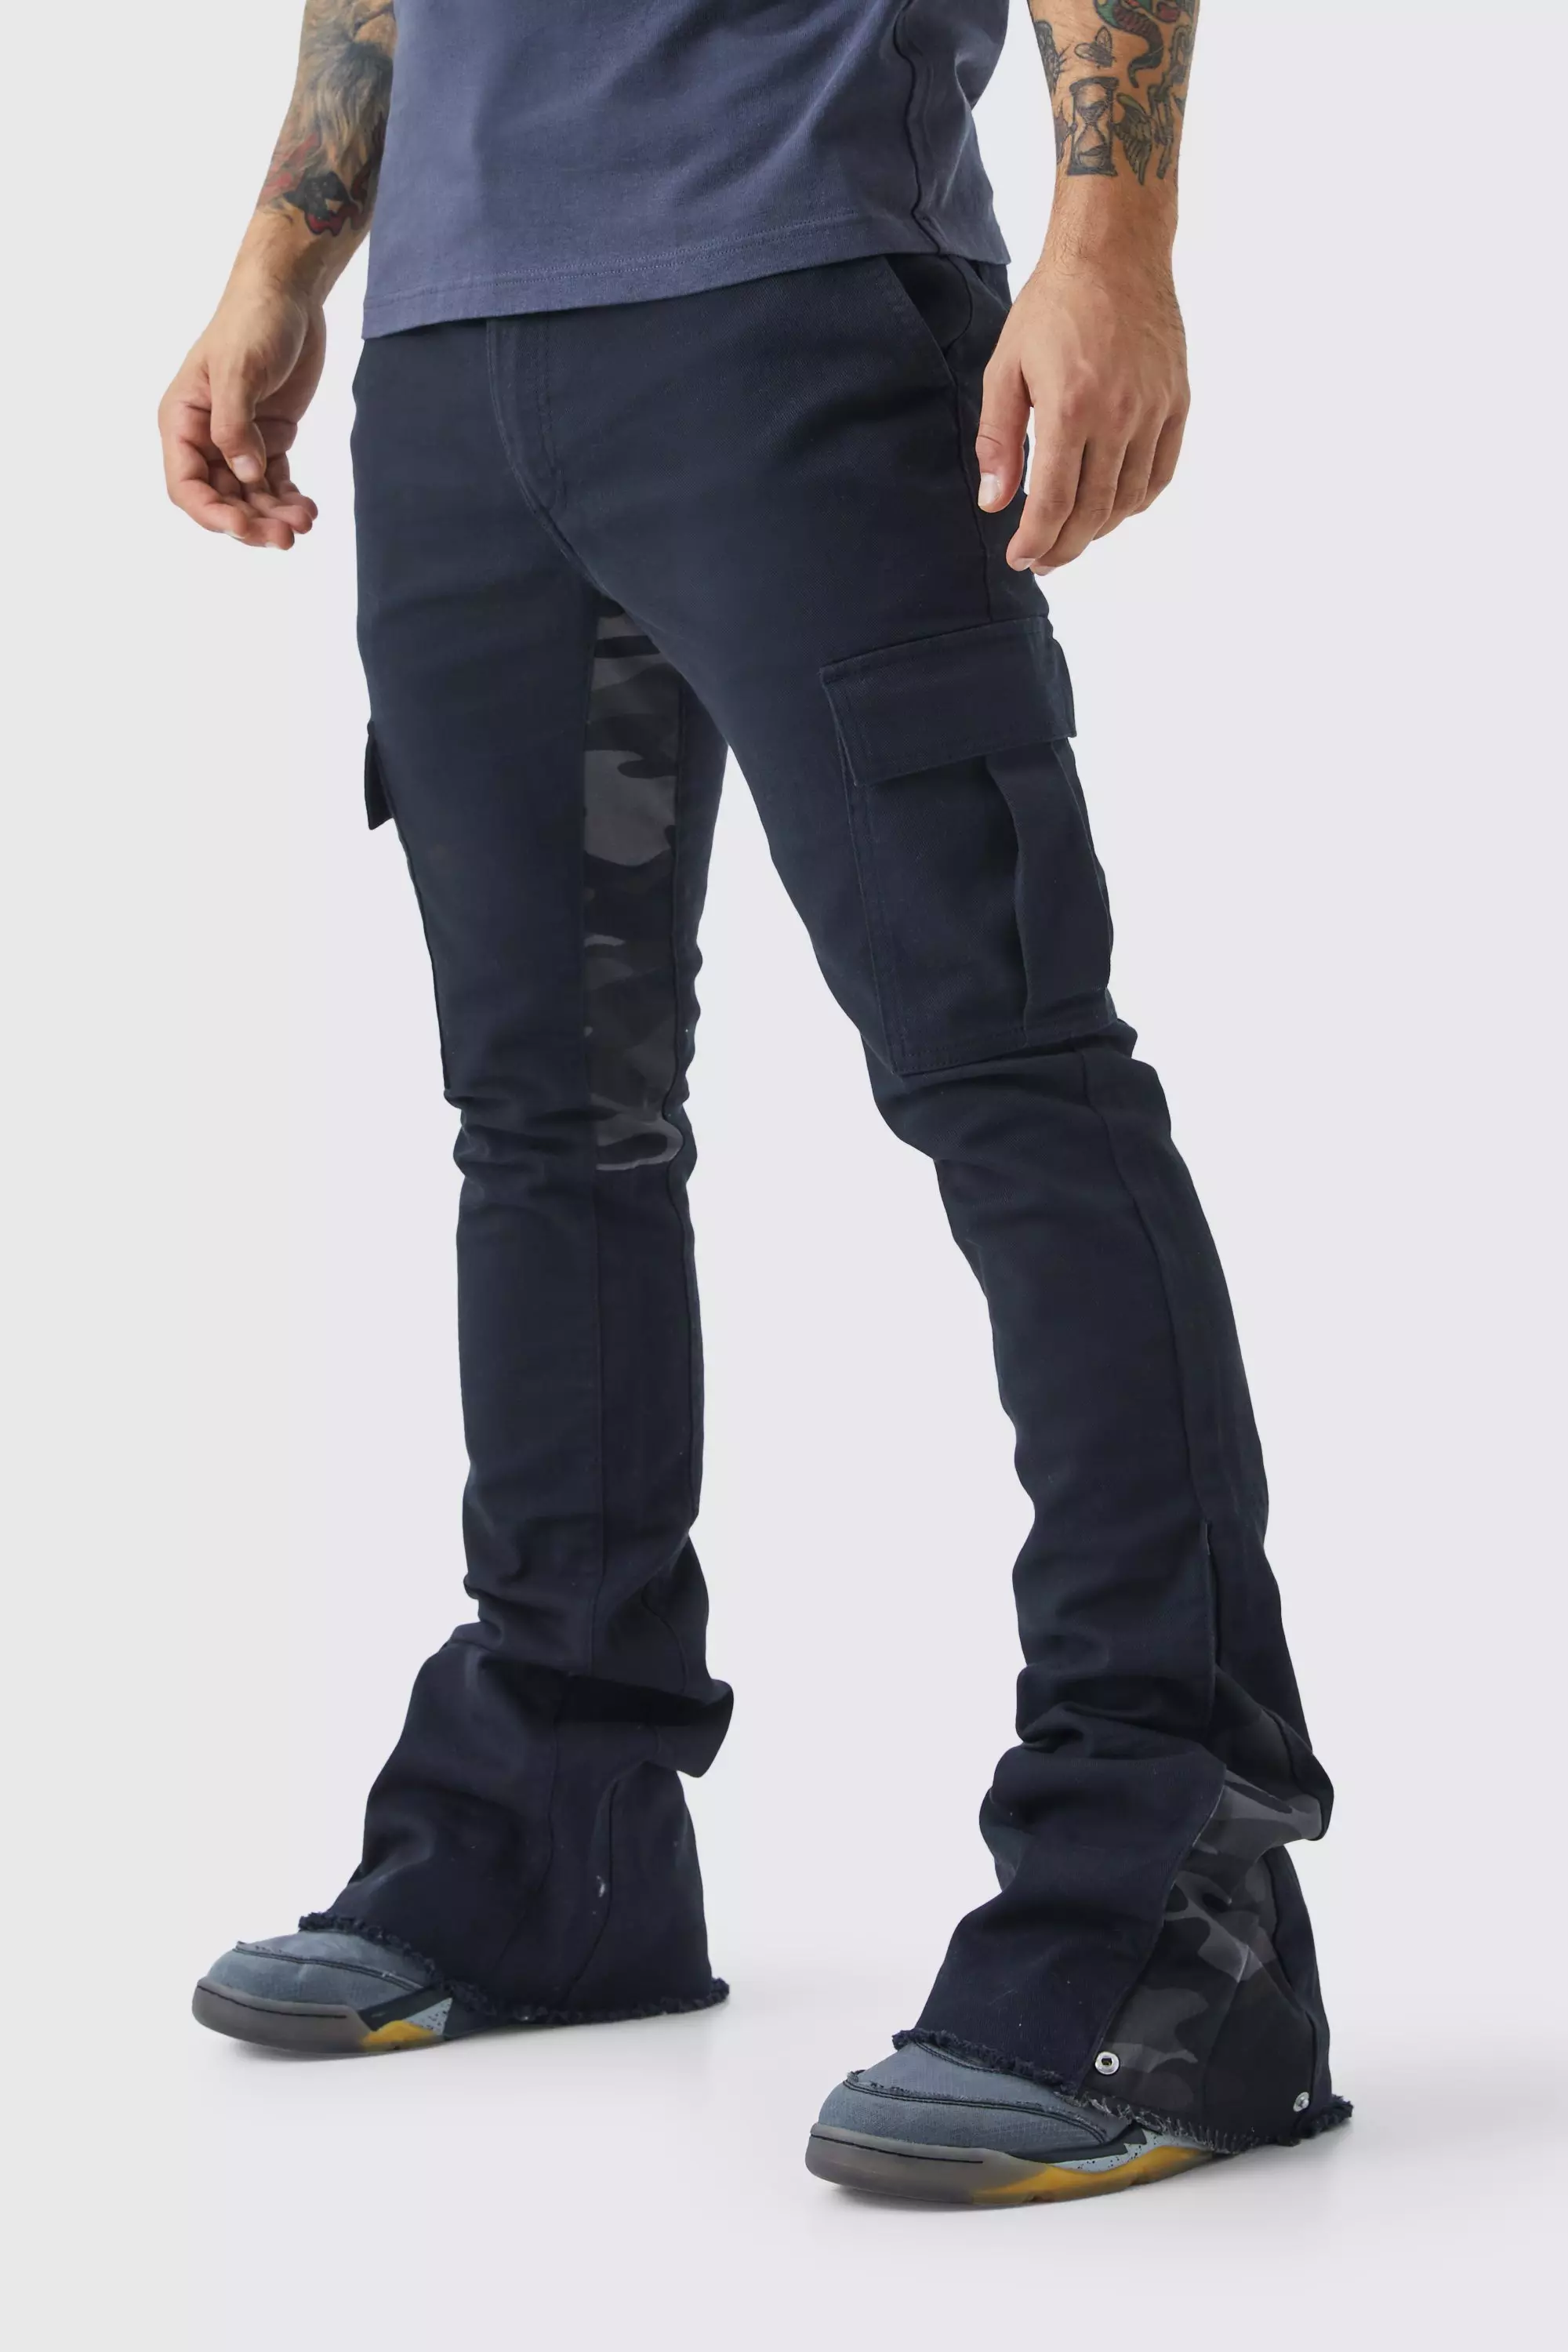 Black Skinny Stacked Flare Camo Gusset Cargo Pants